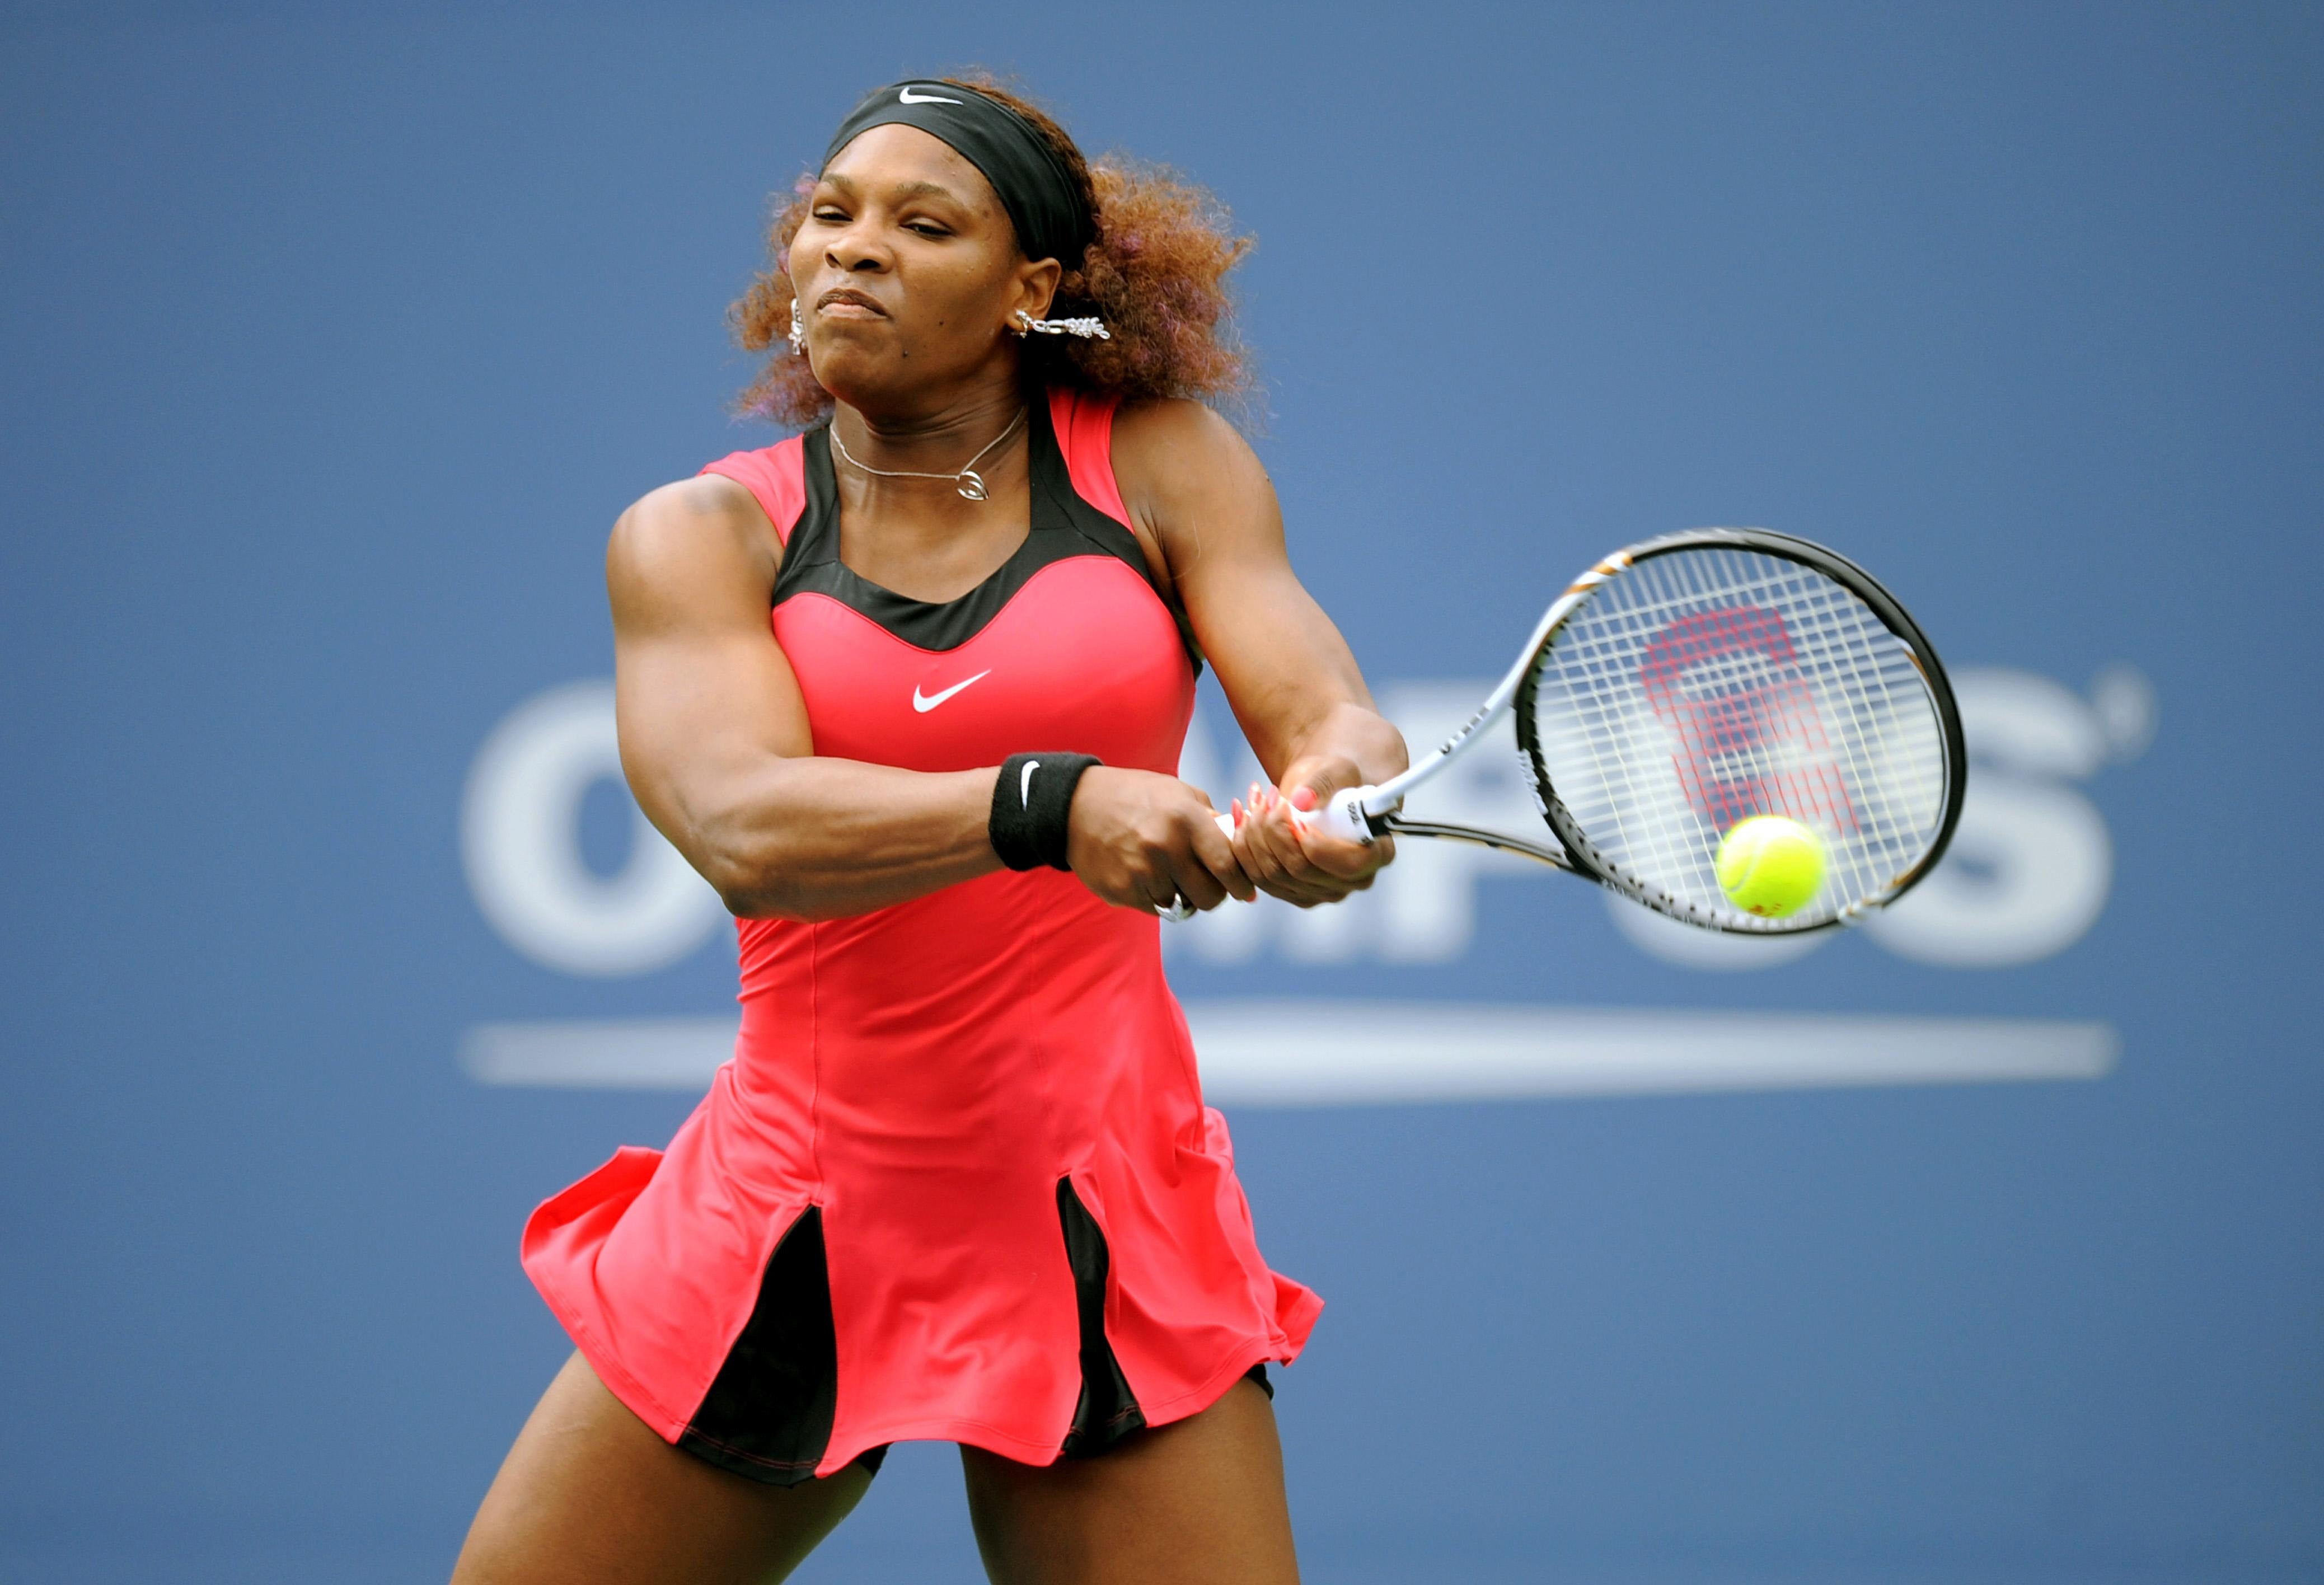 Serena Williams won seven singles titles in the US Open at Flushing Meadows (Medhi Taamallah, PA Archive/PA Images).